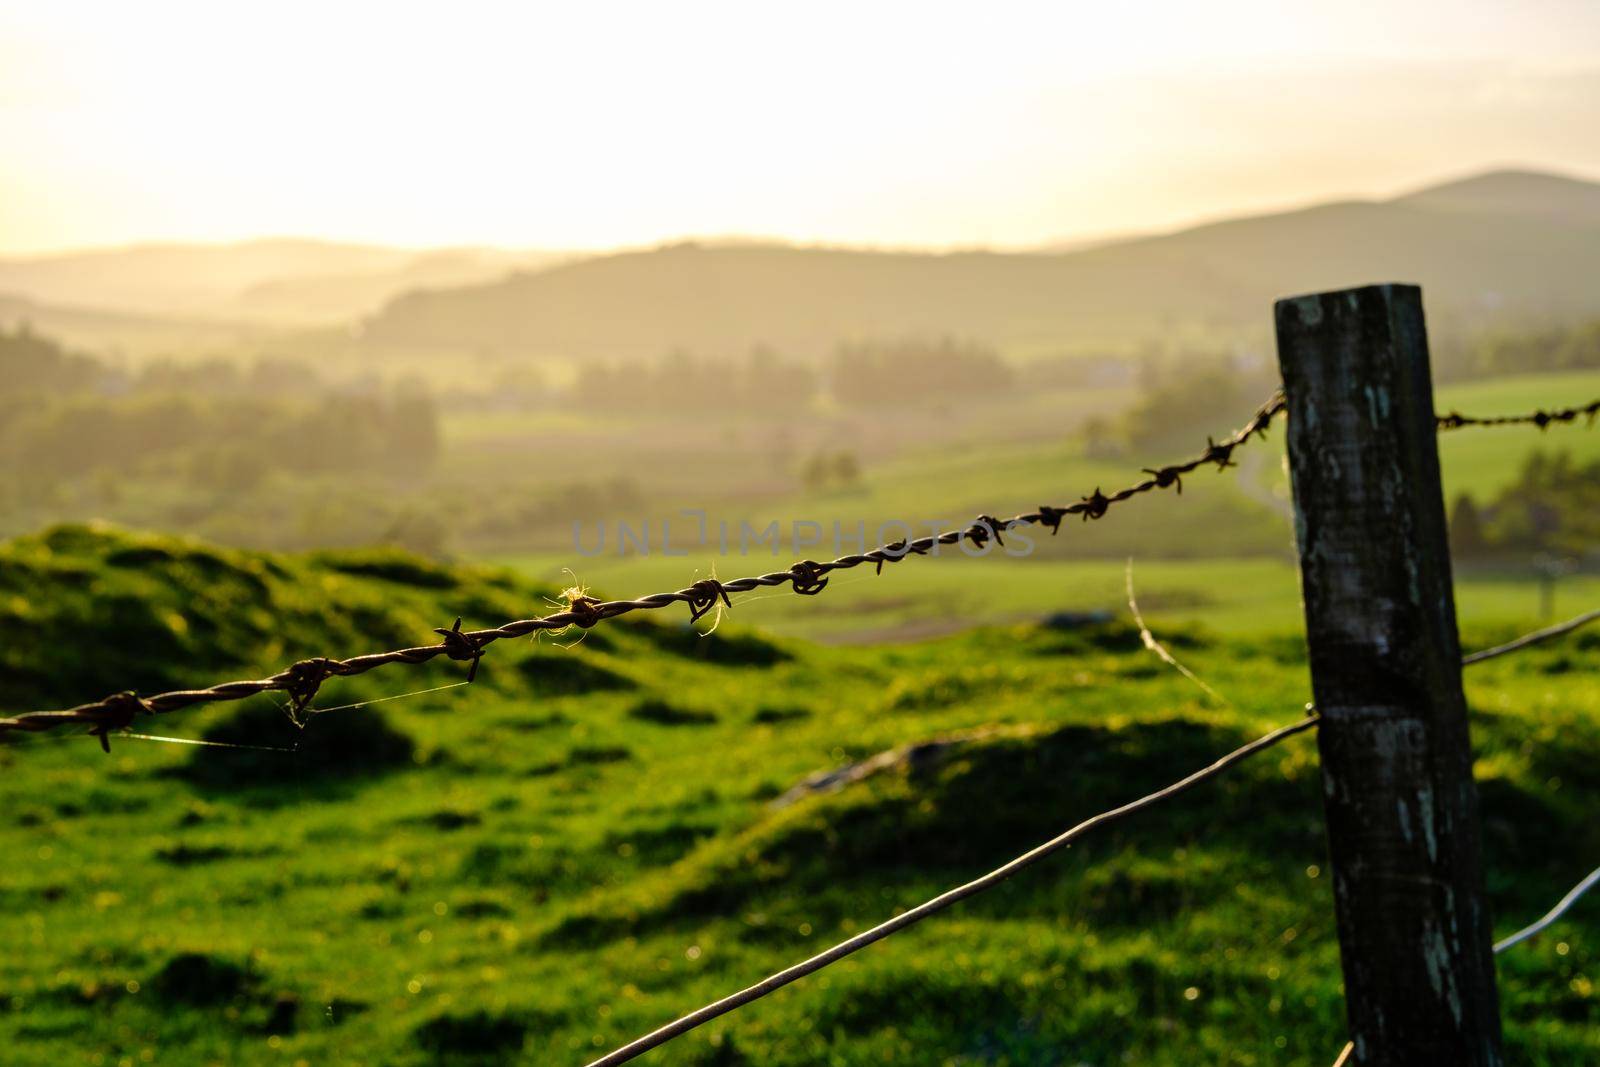 Rolling Scottish Landscape With Fence In Foreground by mrdoomits